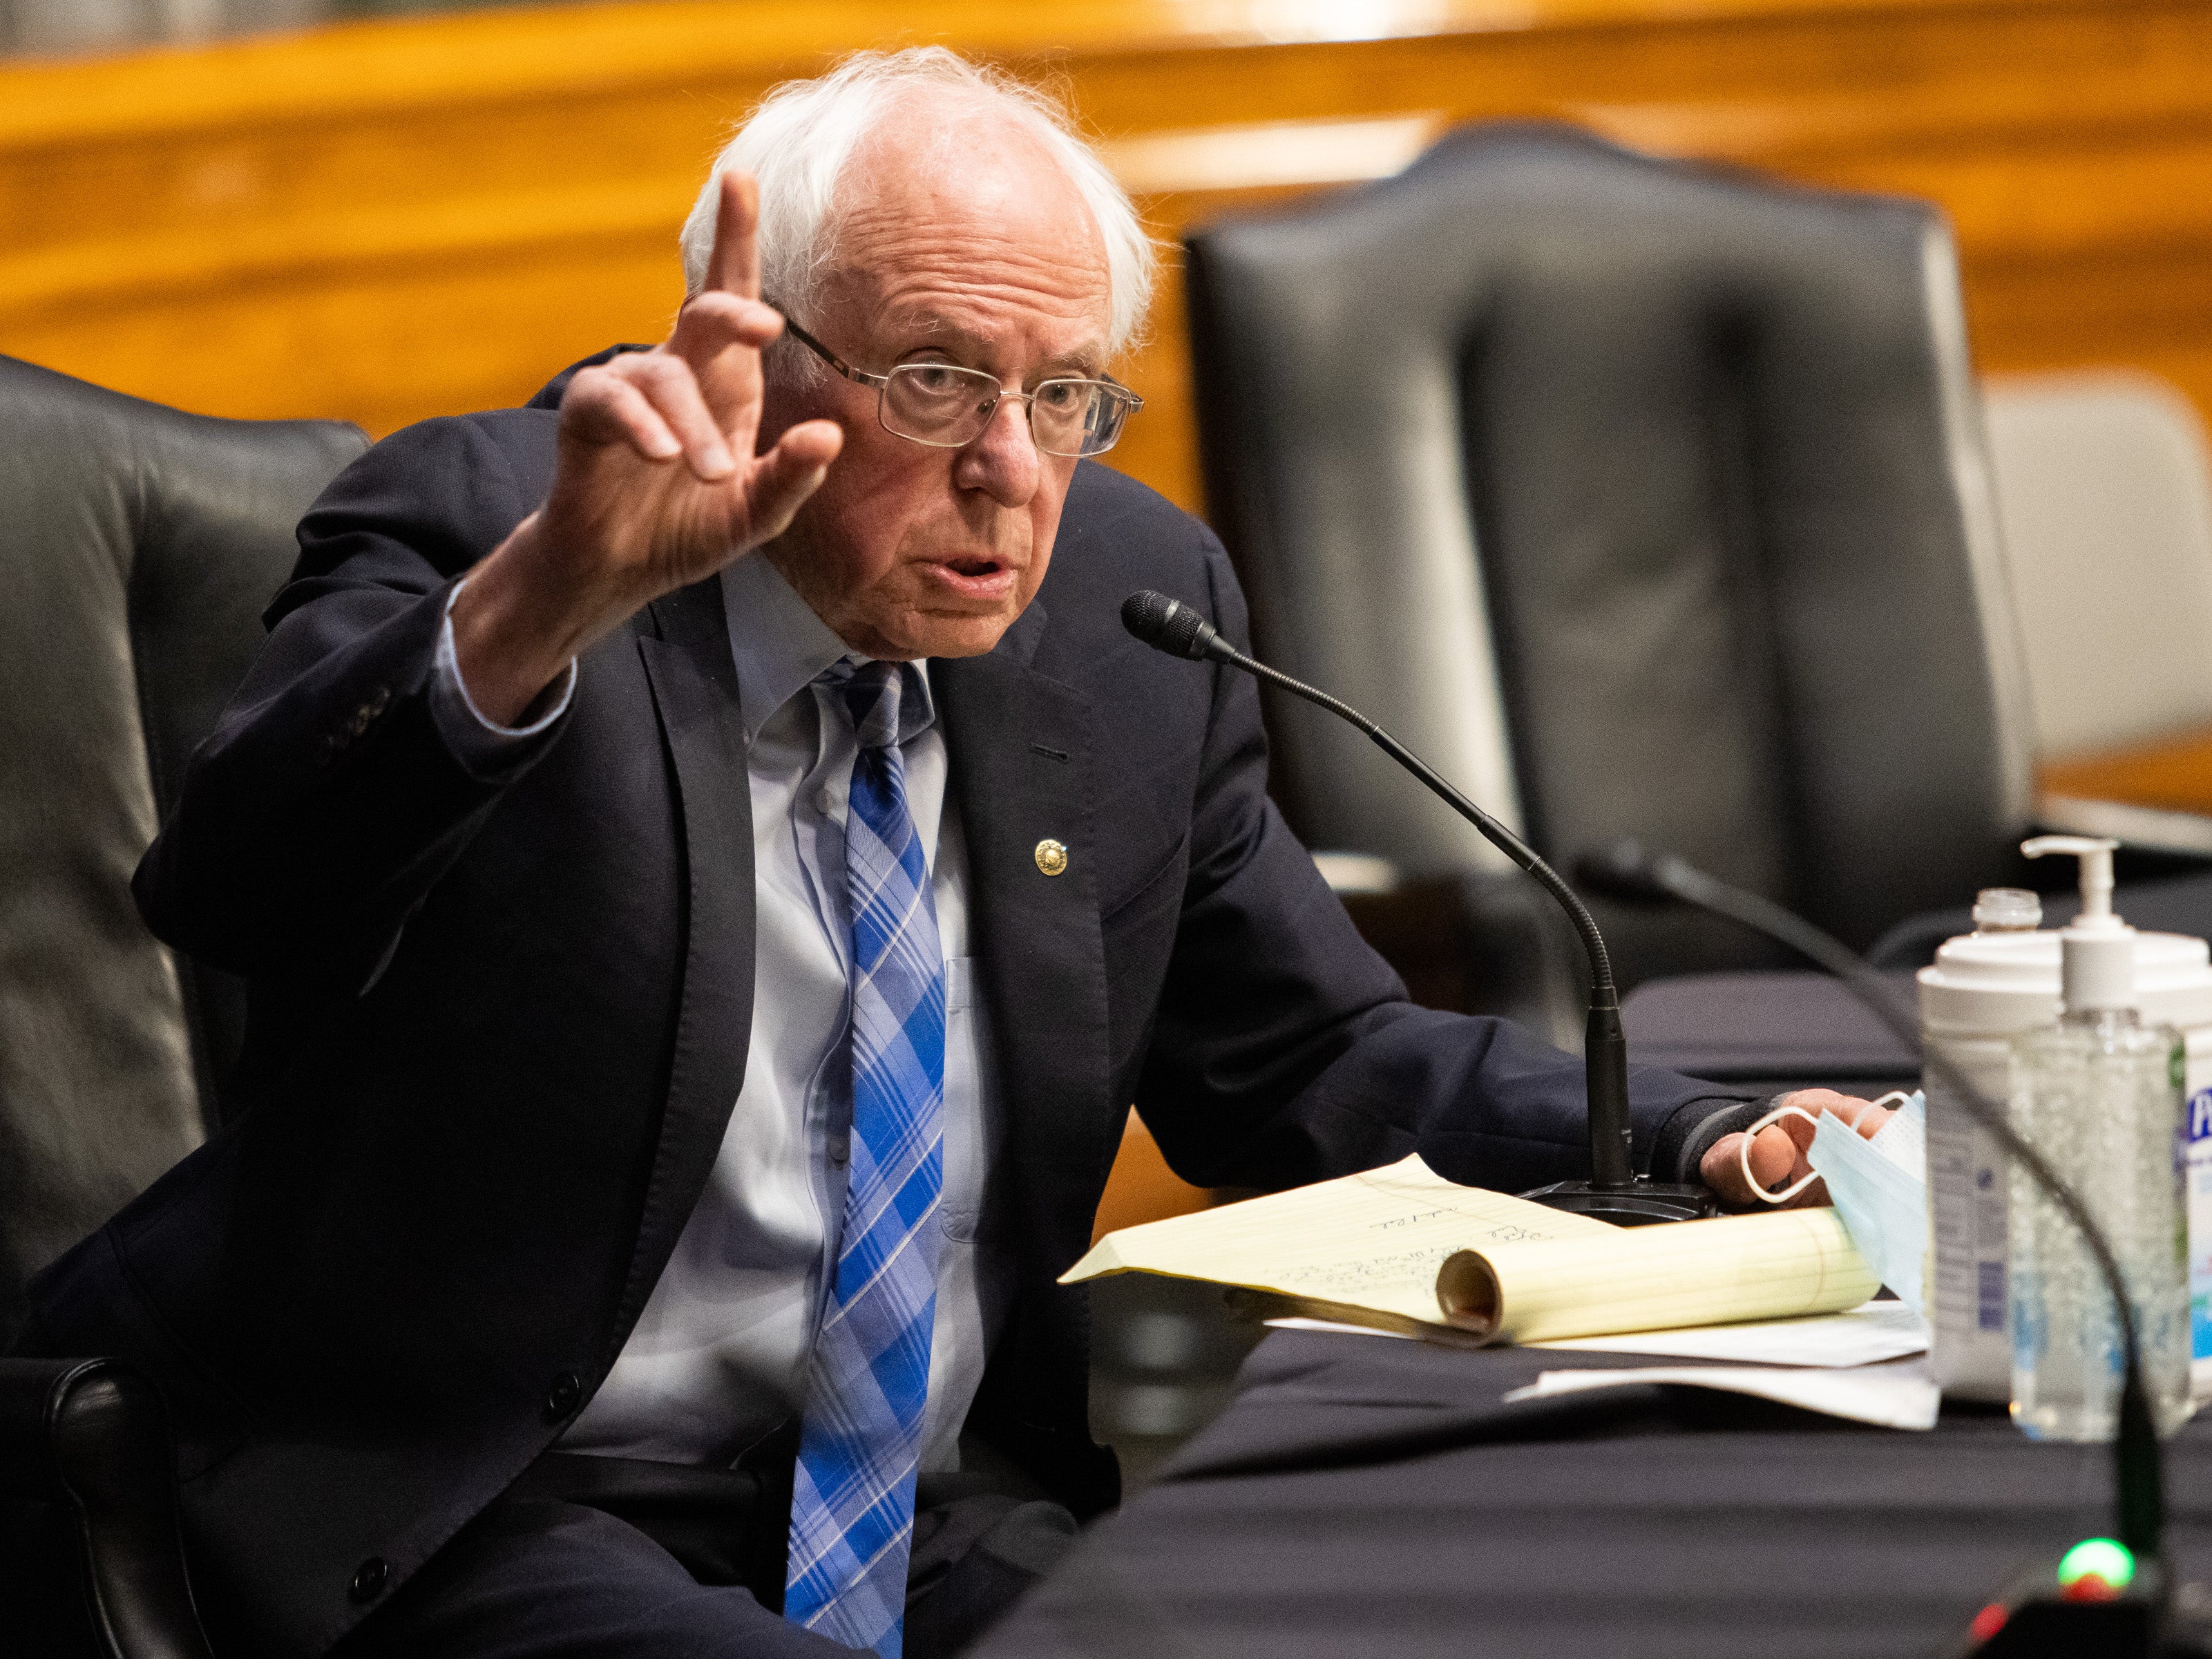 Bernie Sanders spoke out forcefully in defense of embattled California governor Gavin Newsom on Monday.